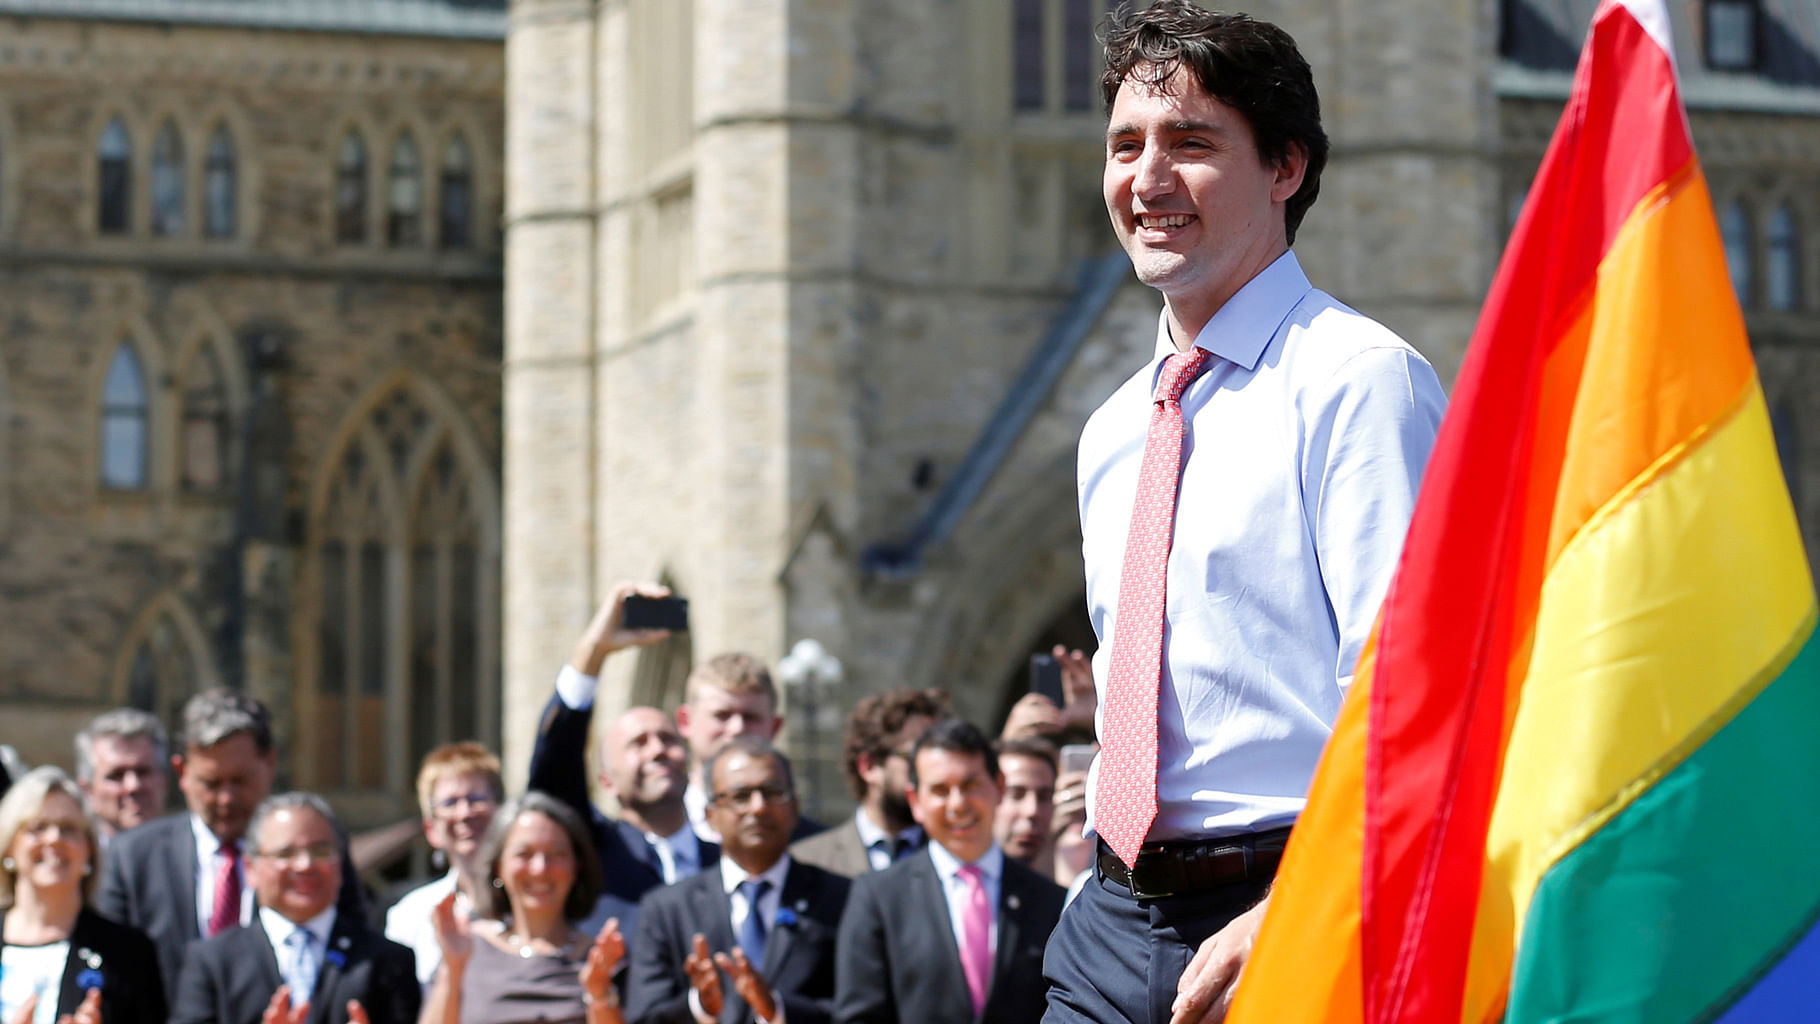 Justin Trudeau smiles for the cameras. (Photo: Reuters)